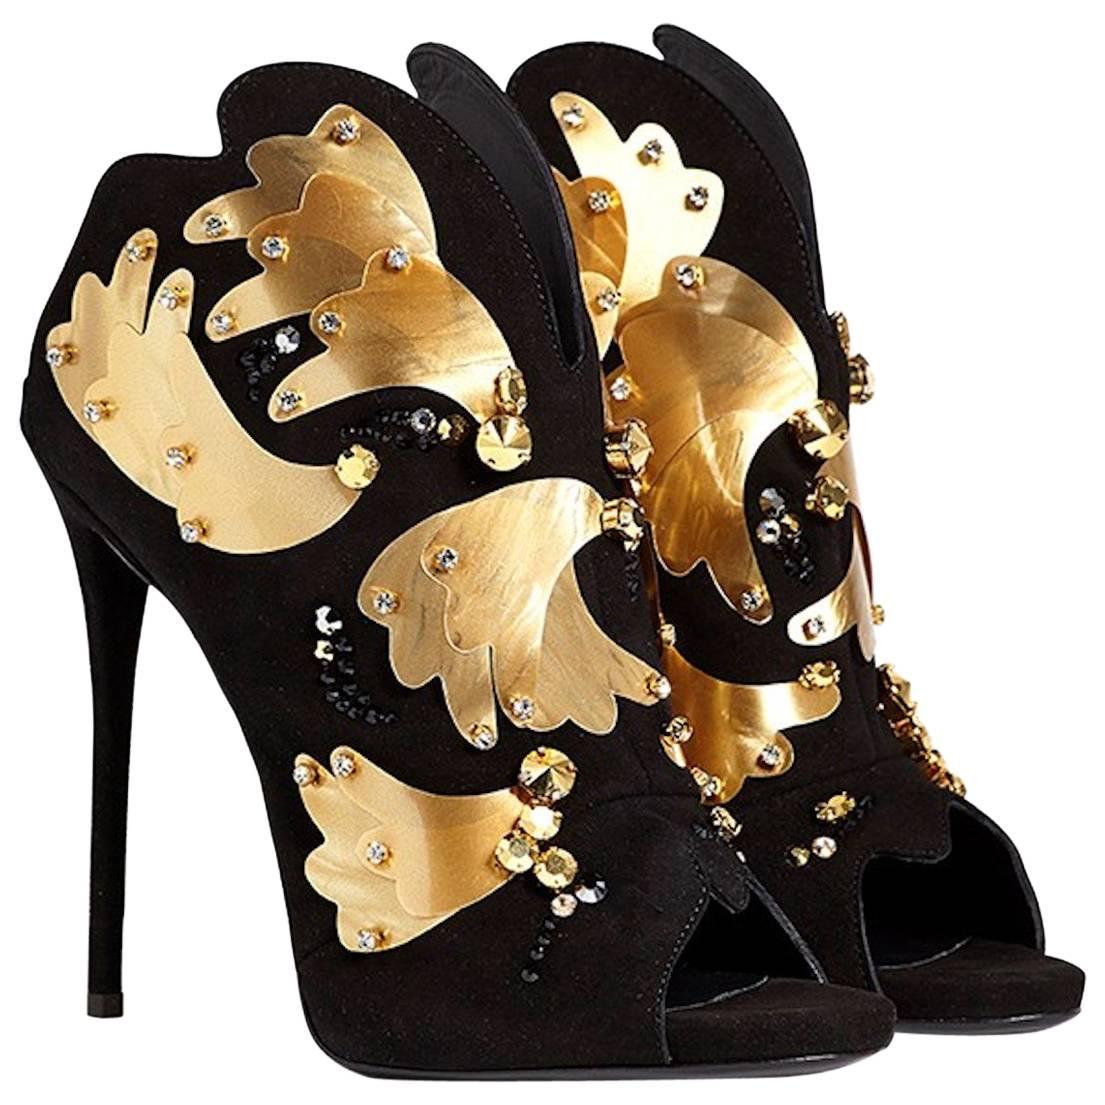 Giuseppe Zanotti NEW Evening Black Suede Gold Crystal Shoes Sandals Heels in Box 1